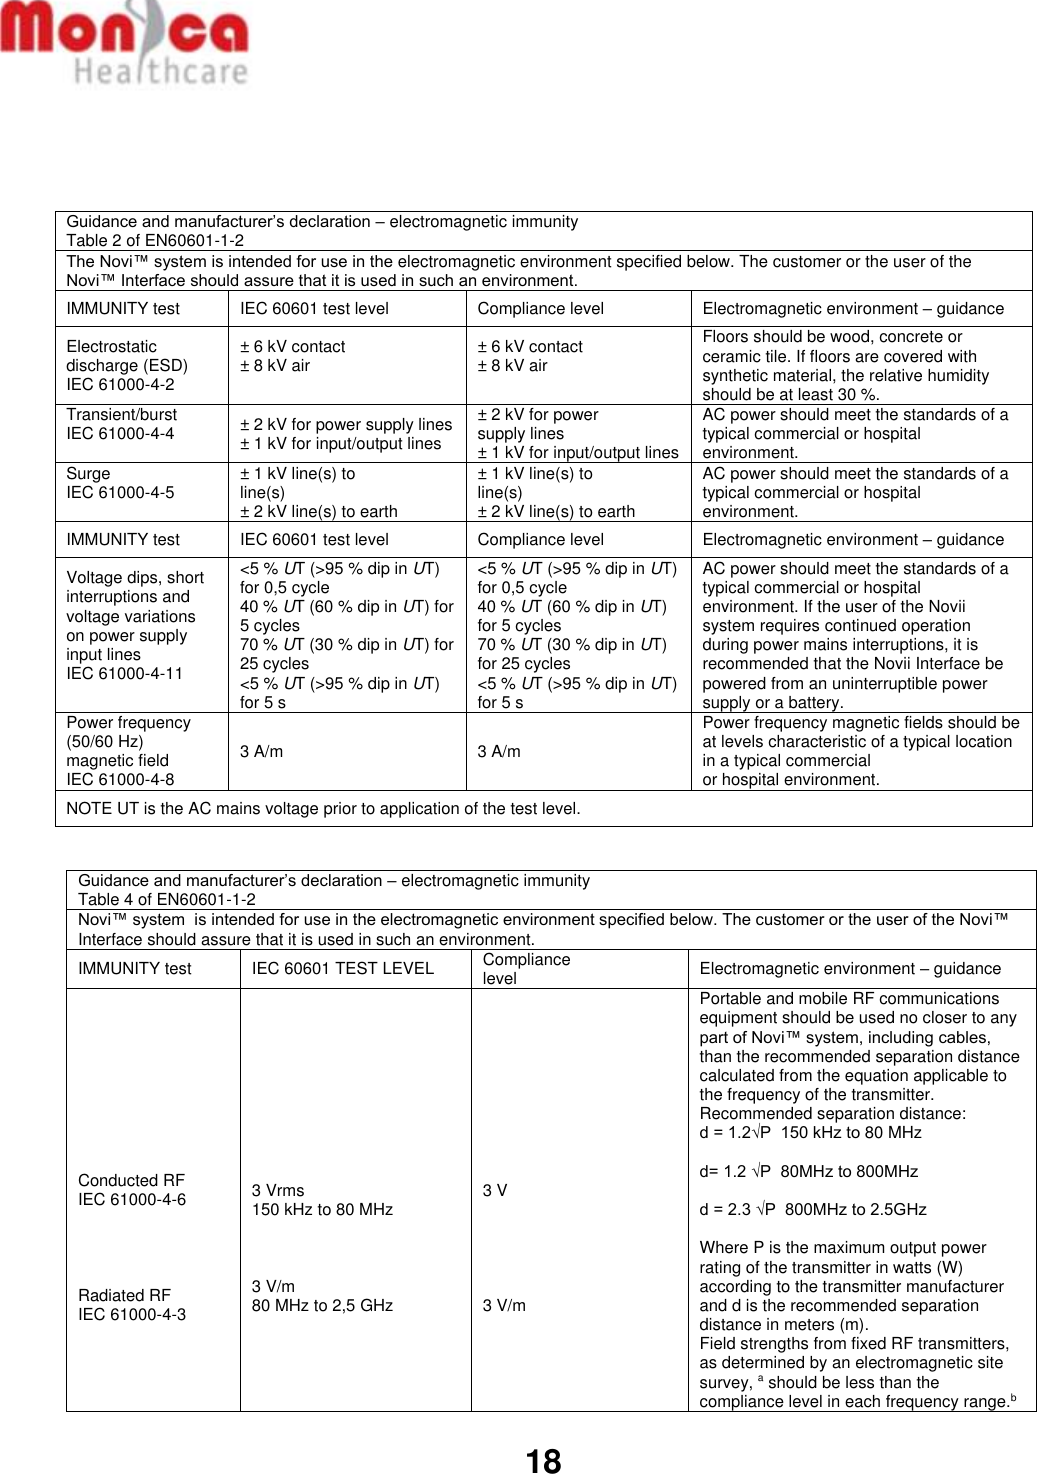   18    Guidance and manufacturer’s declaration – electromagnetic immunity Table 2 of EN60601-1-2 The Novi™ system is intended for use in the electromagnetic environment specified below. The customer or the user of the Novi™ Interface should assure that it is used in such an environment. IMMUNITY test  IEC 60601 test level Compliance level Electromagnetic environment – guidance Electrostatic discharge (ESD) IEC 61000-4-2 ± 6 kV contact ± 8 kV air  ± 6 kV contact ± 8 kV air  Floors should be wood, concrete or ceramic tile. If floors are covered with synthetic material, the relative humidity should be at least 30 %. Transient/burst IEC 61000-4-4  ± 2 kV for power supply lines ± 1 kV for input/output lines ± 2 kV for power supply lines ± 1 kV for input/output lines AC power should meet the standards of a typical commercial or hospital environment. Surge IEC 61000-4-5  ± 1 kV line(s) to line(s) ± 2 kV line(s) to earth ± 1 kV line(s) to line(s) ± 2 kV line(s) to earth AC power should meet the standards of a typical commercial or hospital environment. IMMUNITY test  IEC 60601 test level Compliance level Electromagnetic environment – guidance Voltage dips, short interruptions and voltage variations on power supply input lines IEC 61000-4-11  &lt;5 % UT (&gt;95 % dip in UT) for 0,5 cycle 40 % UT (60 % dip in UT) for 5 cycles 70 % UT (30 % dip in UT) for 25 cycles &lt;5 % UT (&gt;95 % dip in UT) for 5 s &lt;5 % UT (&gt;95 % dip in UT) for 0,5 cycle 40 % UT (60 % dip in UT) for 5 cycles 70 % UT (30 % dip in UT) for 25 cycles &lt;5 % UT (&gt;95 % dip in UT) for 5 s AC power should meet the standards of a typical commercial or hospital environment. If the user of the Novii system requires continued operation during power mains interruptions, it is recommended that the Novii Interface be powered from an uninterruptible power supply or a battery. Power frequency (50/60 Hz) magnetic field IEC 61000-4-8 3 A/m 3 A/m Power frequency magnetic fields should be at levels characteristic of a typical location in a typical commercial or hospital environment. NOTE UT is the AC mains voltage prior to application of the test level.  Guidance and manufacturer’s declaration – electromagnetic immunity Table 4 of EN60601-1-2 Novi™ system  is intended for use in the electromagnetic environment specified below. The customer or the user of the Novi™ Interface should assure that it is used in such an environment. IMMUNITY test IEC 60601 TEST LEVEL Compliance level Electromagnetic environment – guidance      Conducted RF IEC 61000-4-6     Radiated RF IEC 61000-4-3      3 Vrms 150 kHz to 80 MHz    3 V/m 80 MHz to 2,5 GHz      3 V      3 V/m Portable and mobile RF communications equipment should be used no closer to any part of Novi™ system, including cables, than the recommended separation distance calculated from the equation applicable to the frequency of the transmitter. Recommended separation distance: d = 1.2√P  150 kHz to 80 MHz  d= 1.2 √P  80MHz to 800MHz  d = 2.3 √P  800MHz to 2.5GHz  Where P is the maximum output power rating of the transmitter in watts (W) according to the transmitter manufacturer and d is the recommended separation distance in meters (m). Field strengths from fixed RF transmitters, as determined by an electromagnetic site survey, a should be less than the compliance level in each frequency range.b 